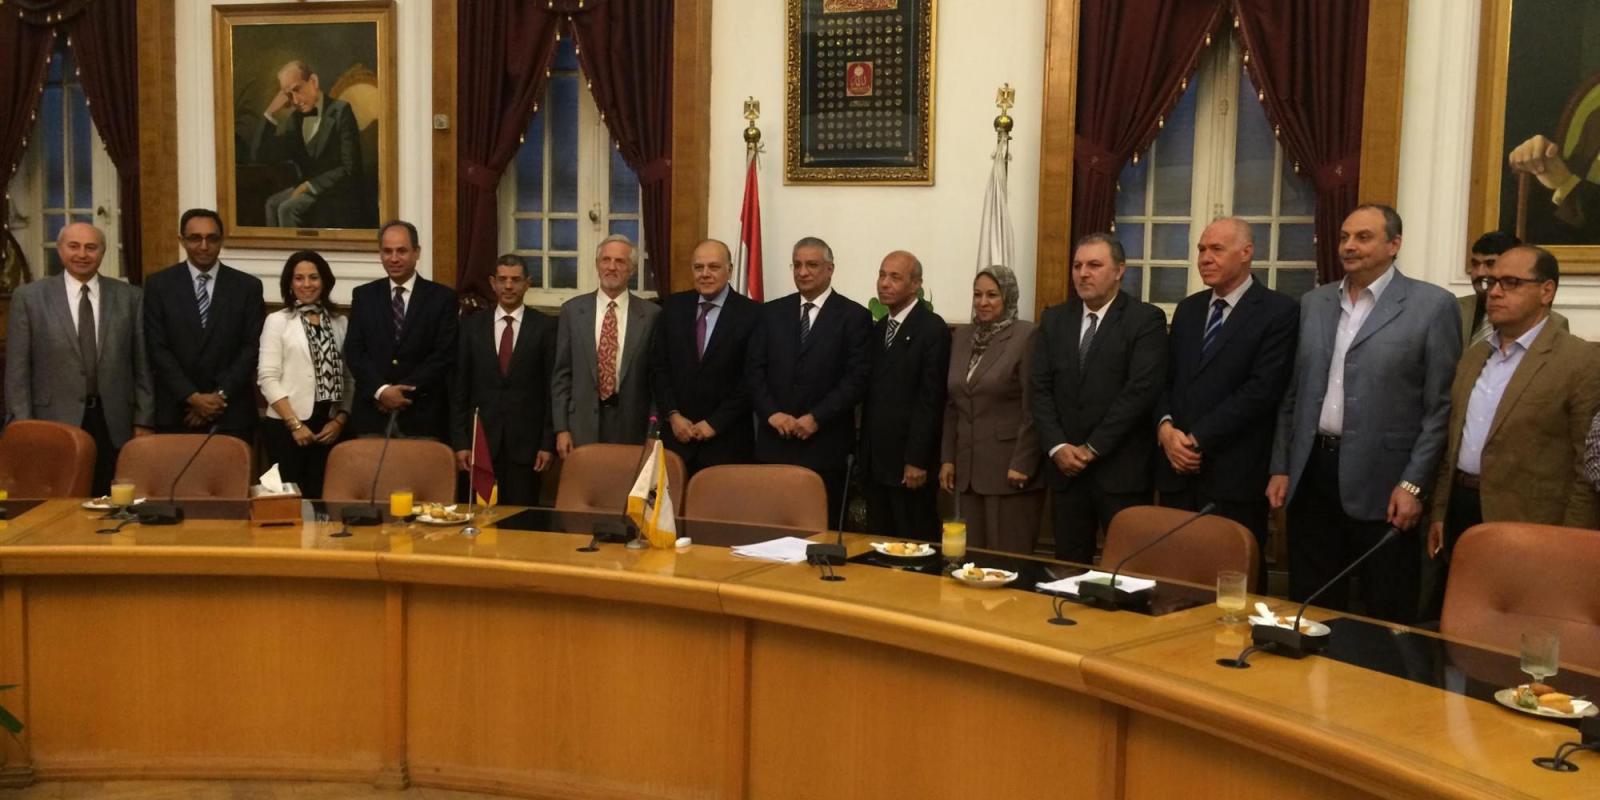  AUC and the Cairo governorate recently signed a MoU to promote sustainable urban development in the city